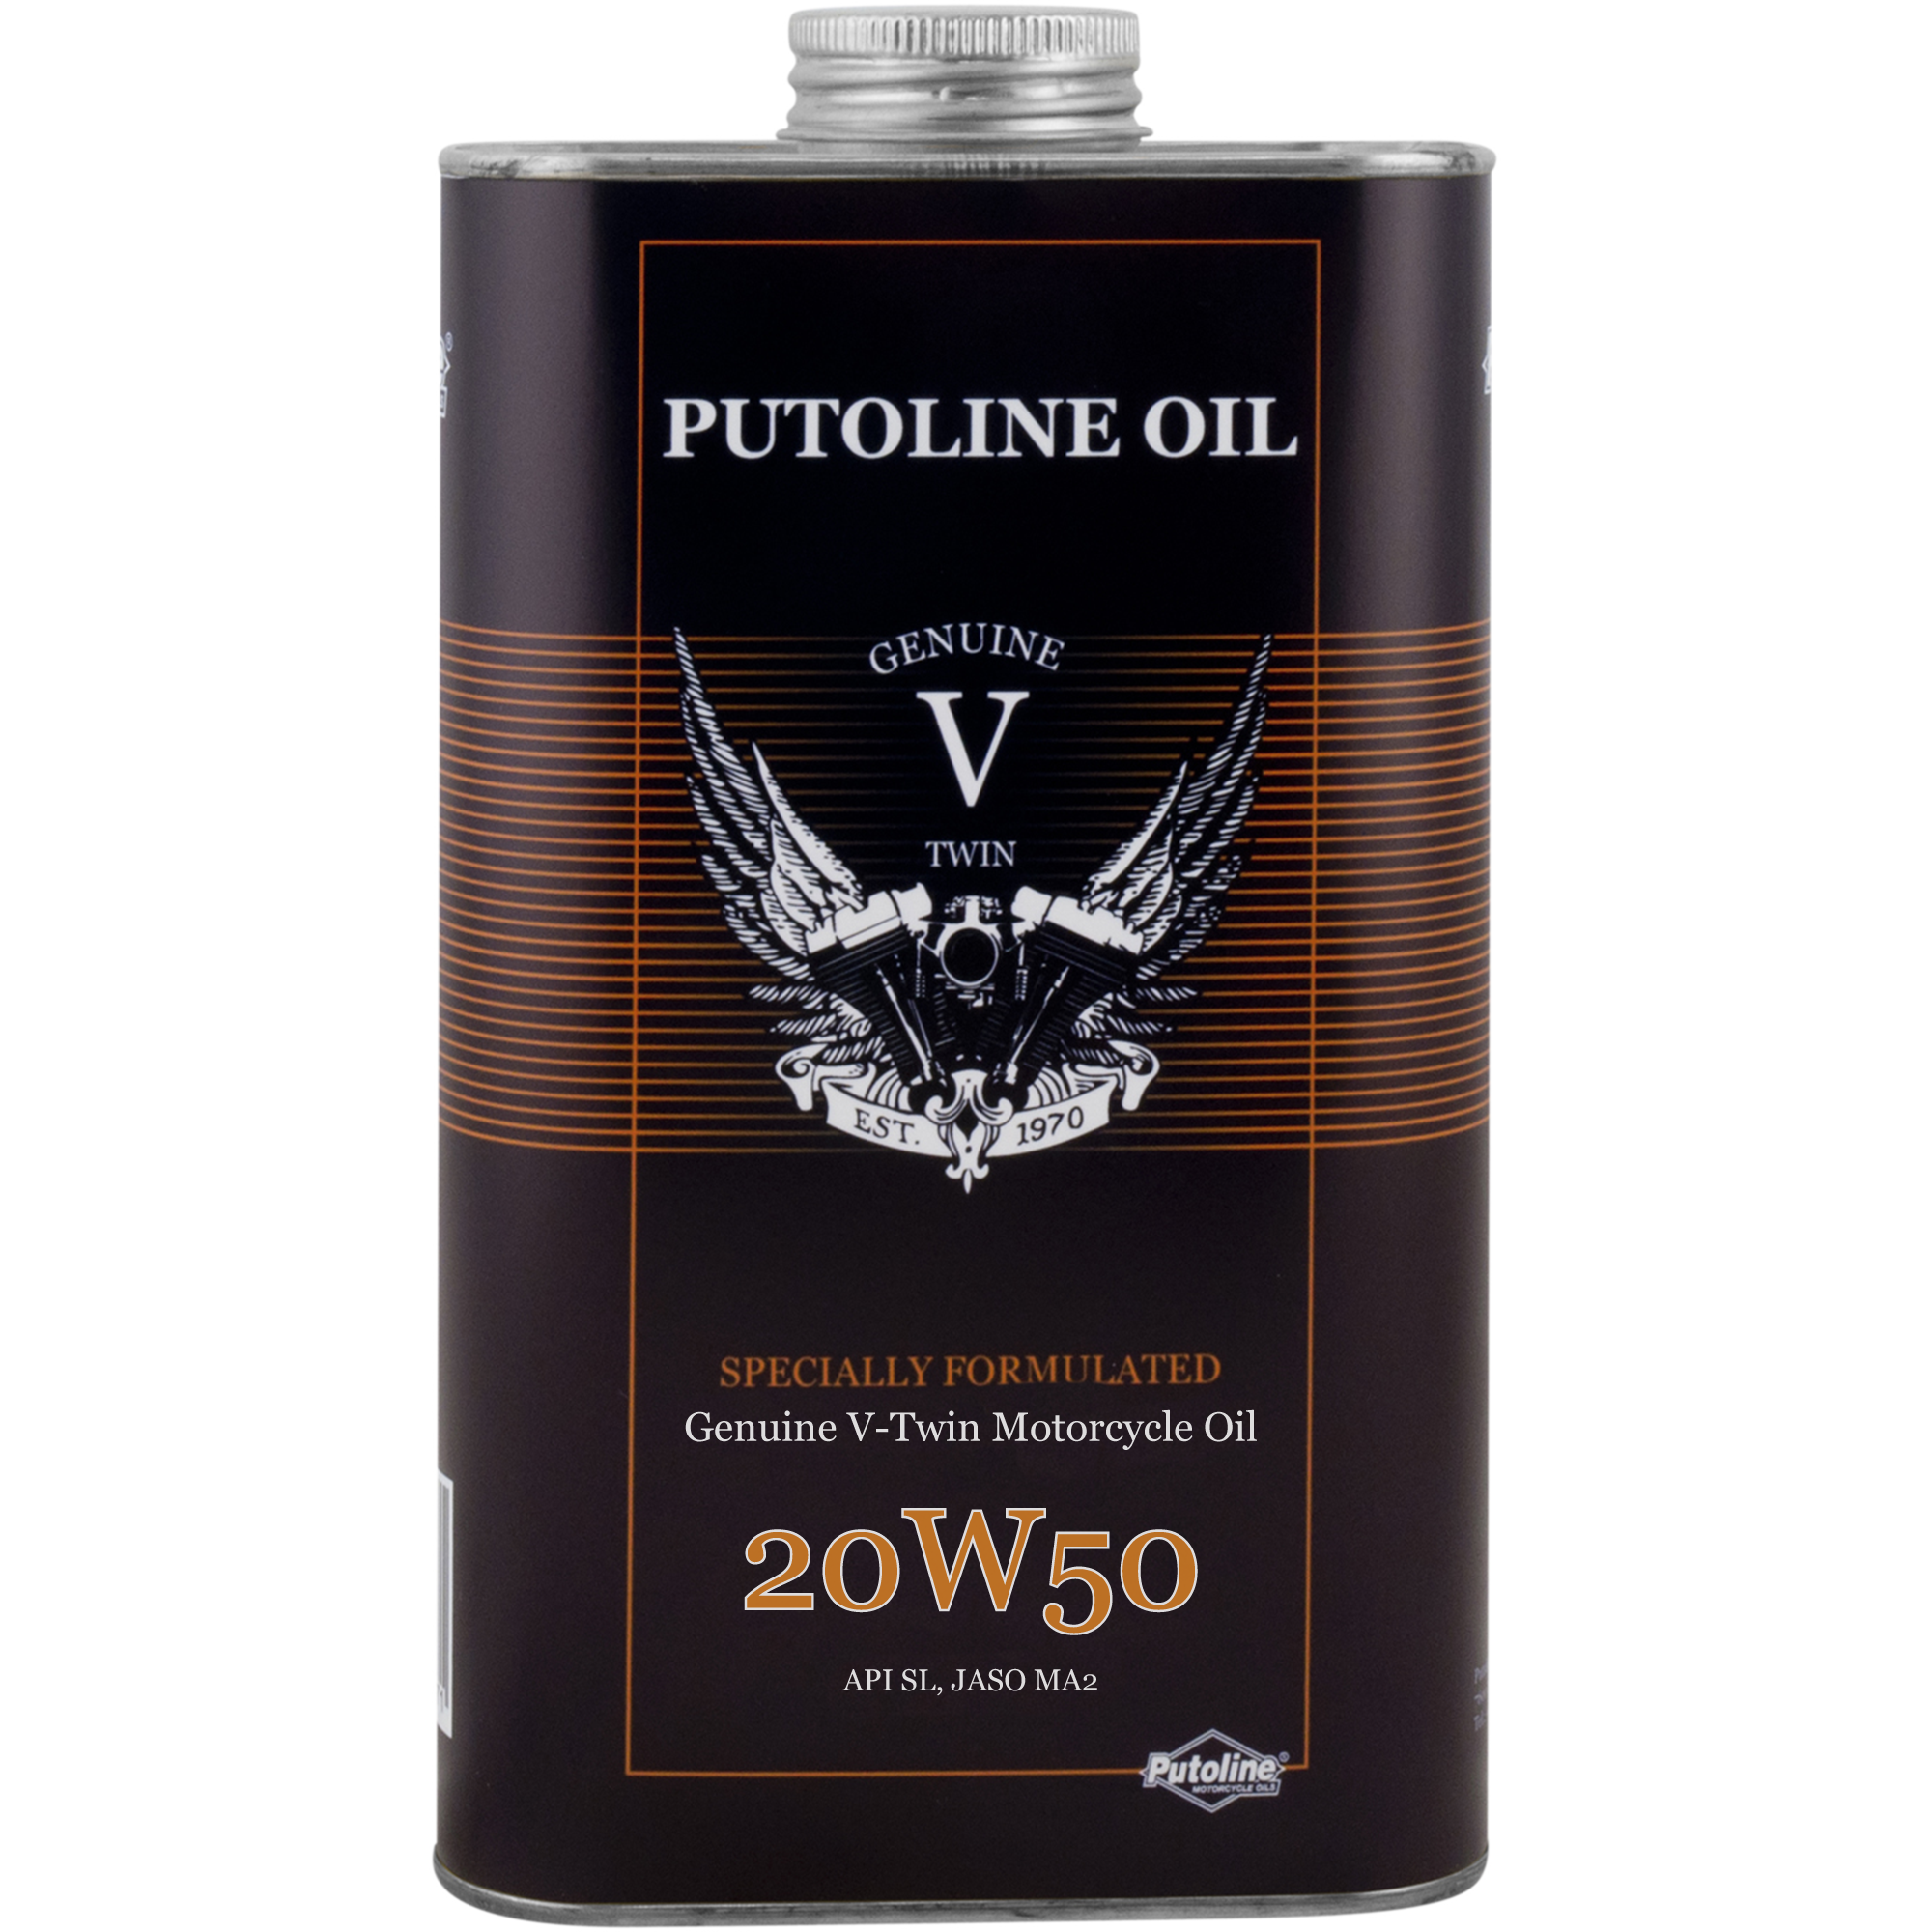 74110-1 Genuine V-Twin Motorcycle Oil SAE 20W-50 is een vol-synthetische olie.